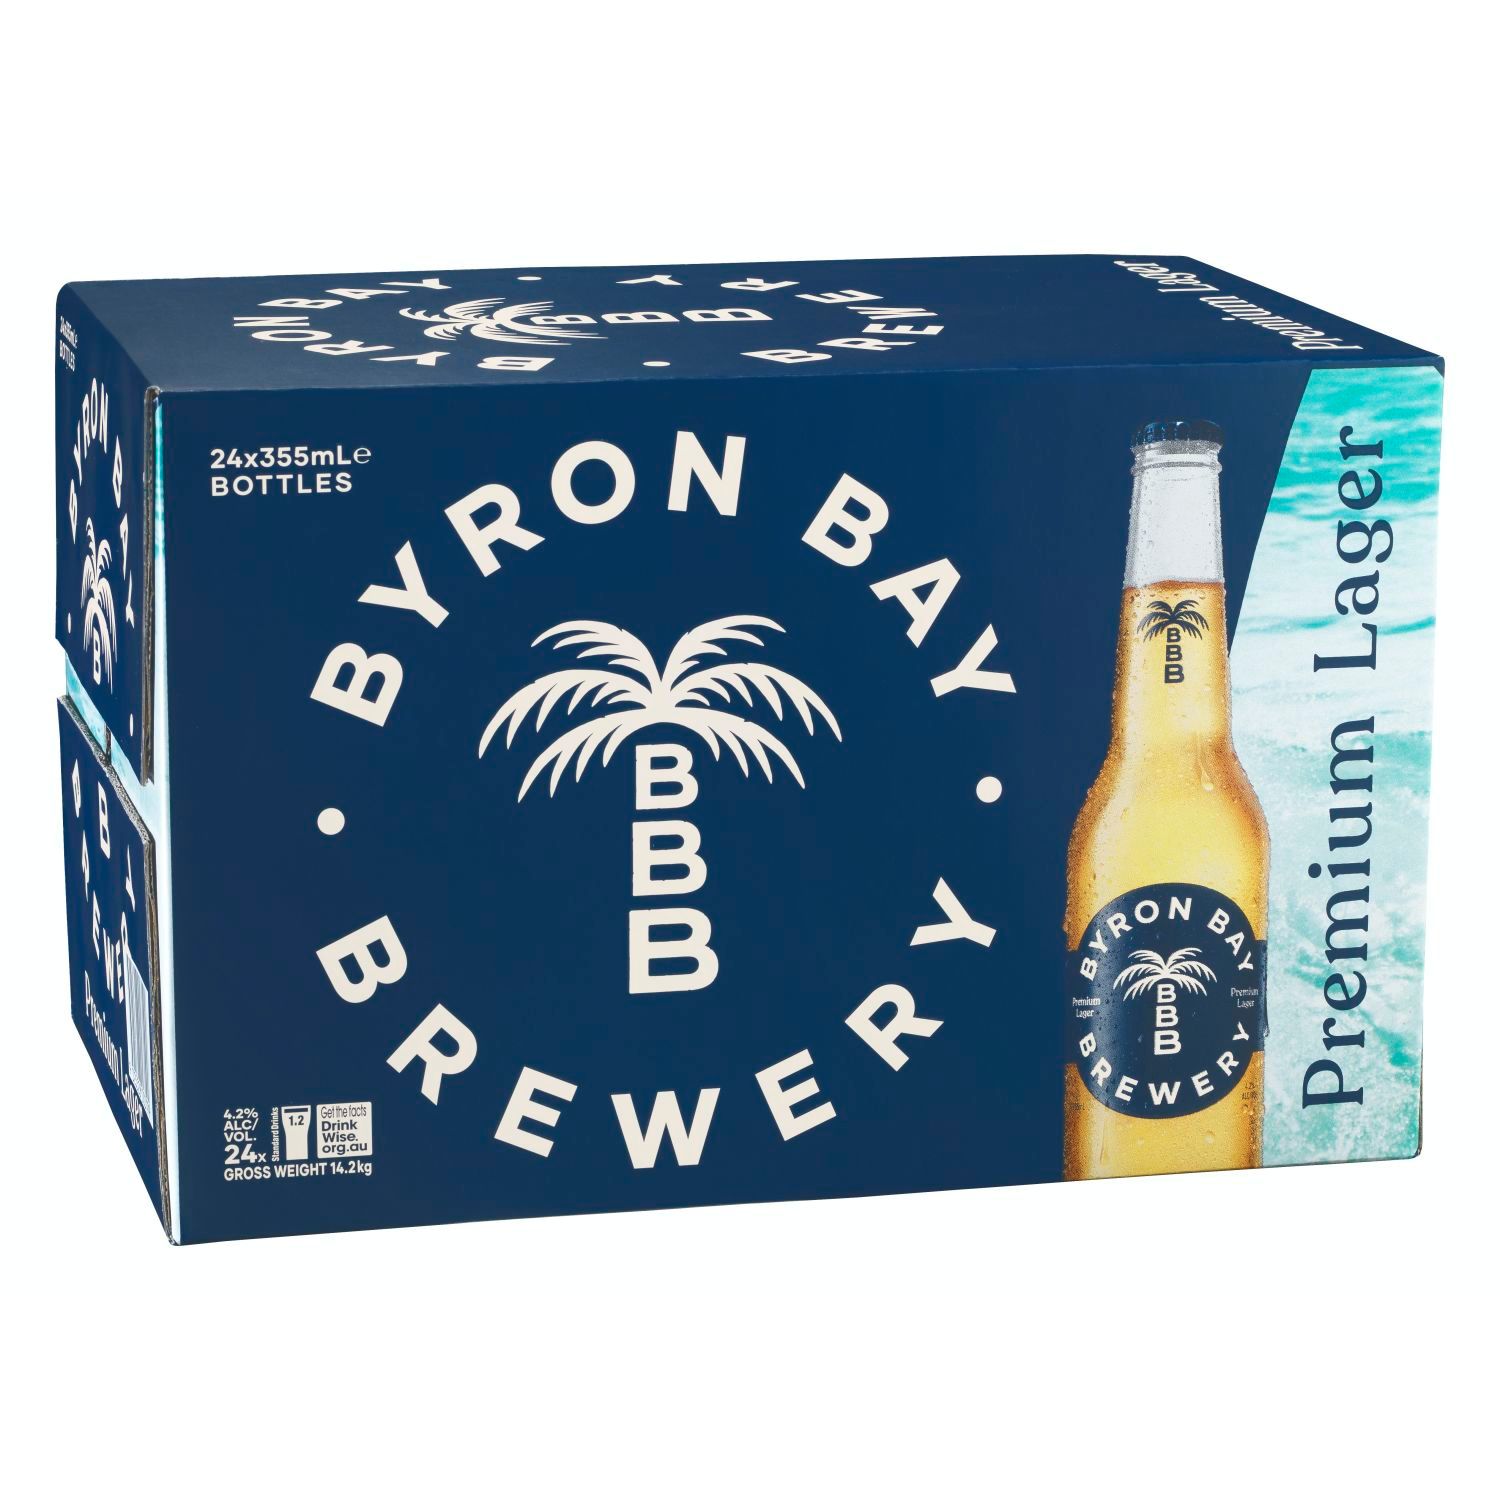 Byron Bay Brewery Premium Lager Bottle 355mL 24 Pack